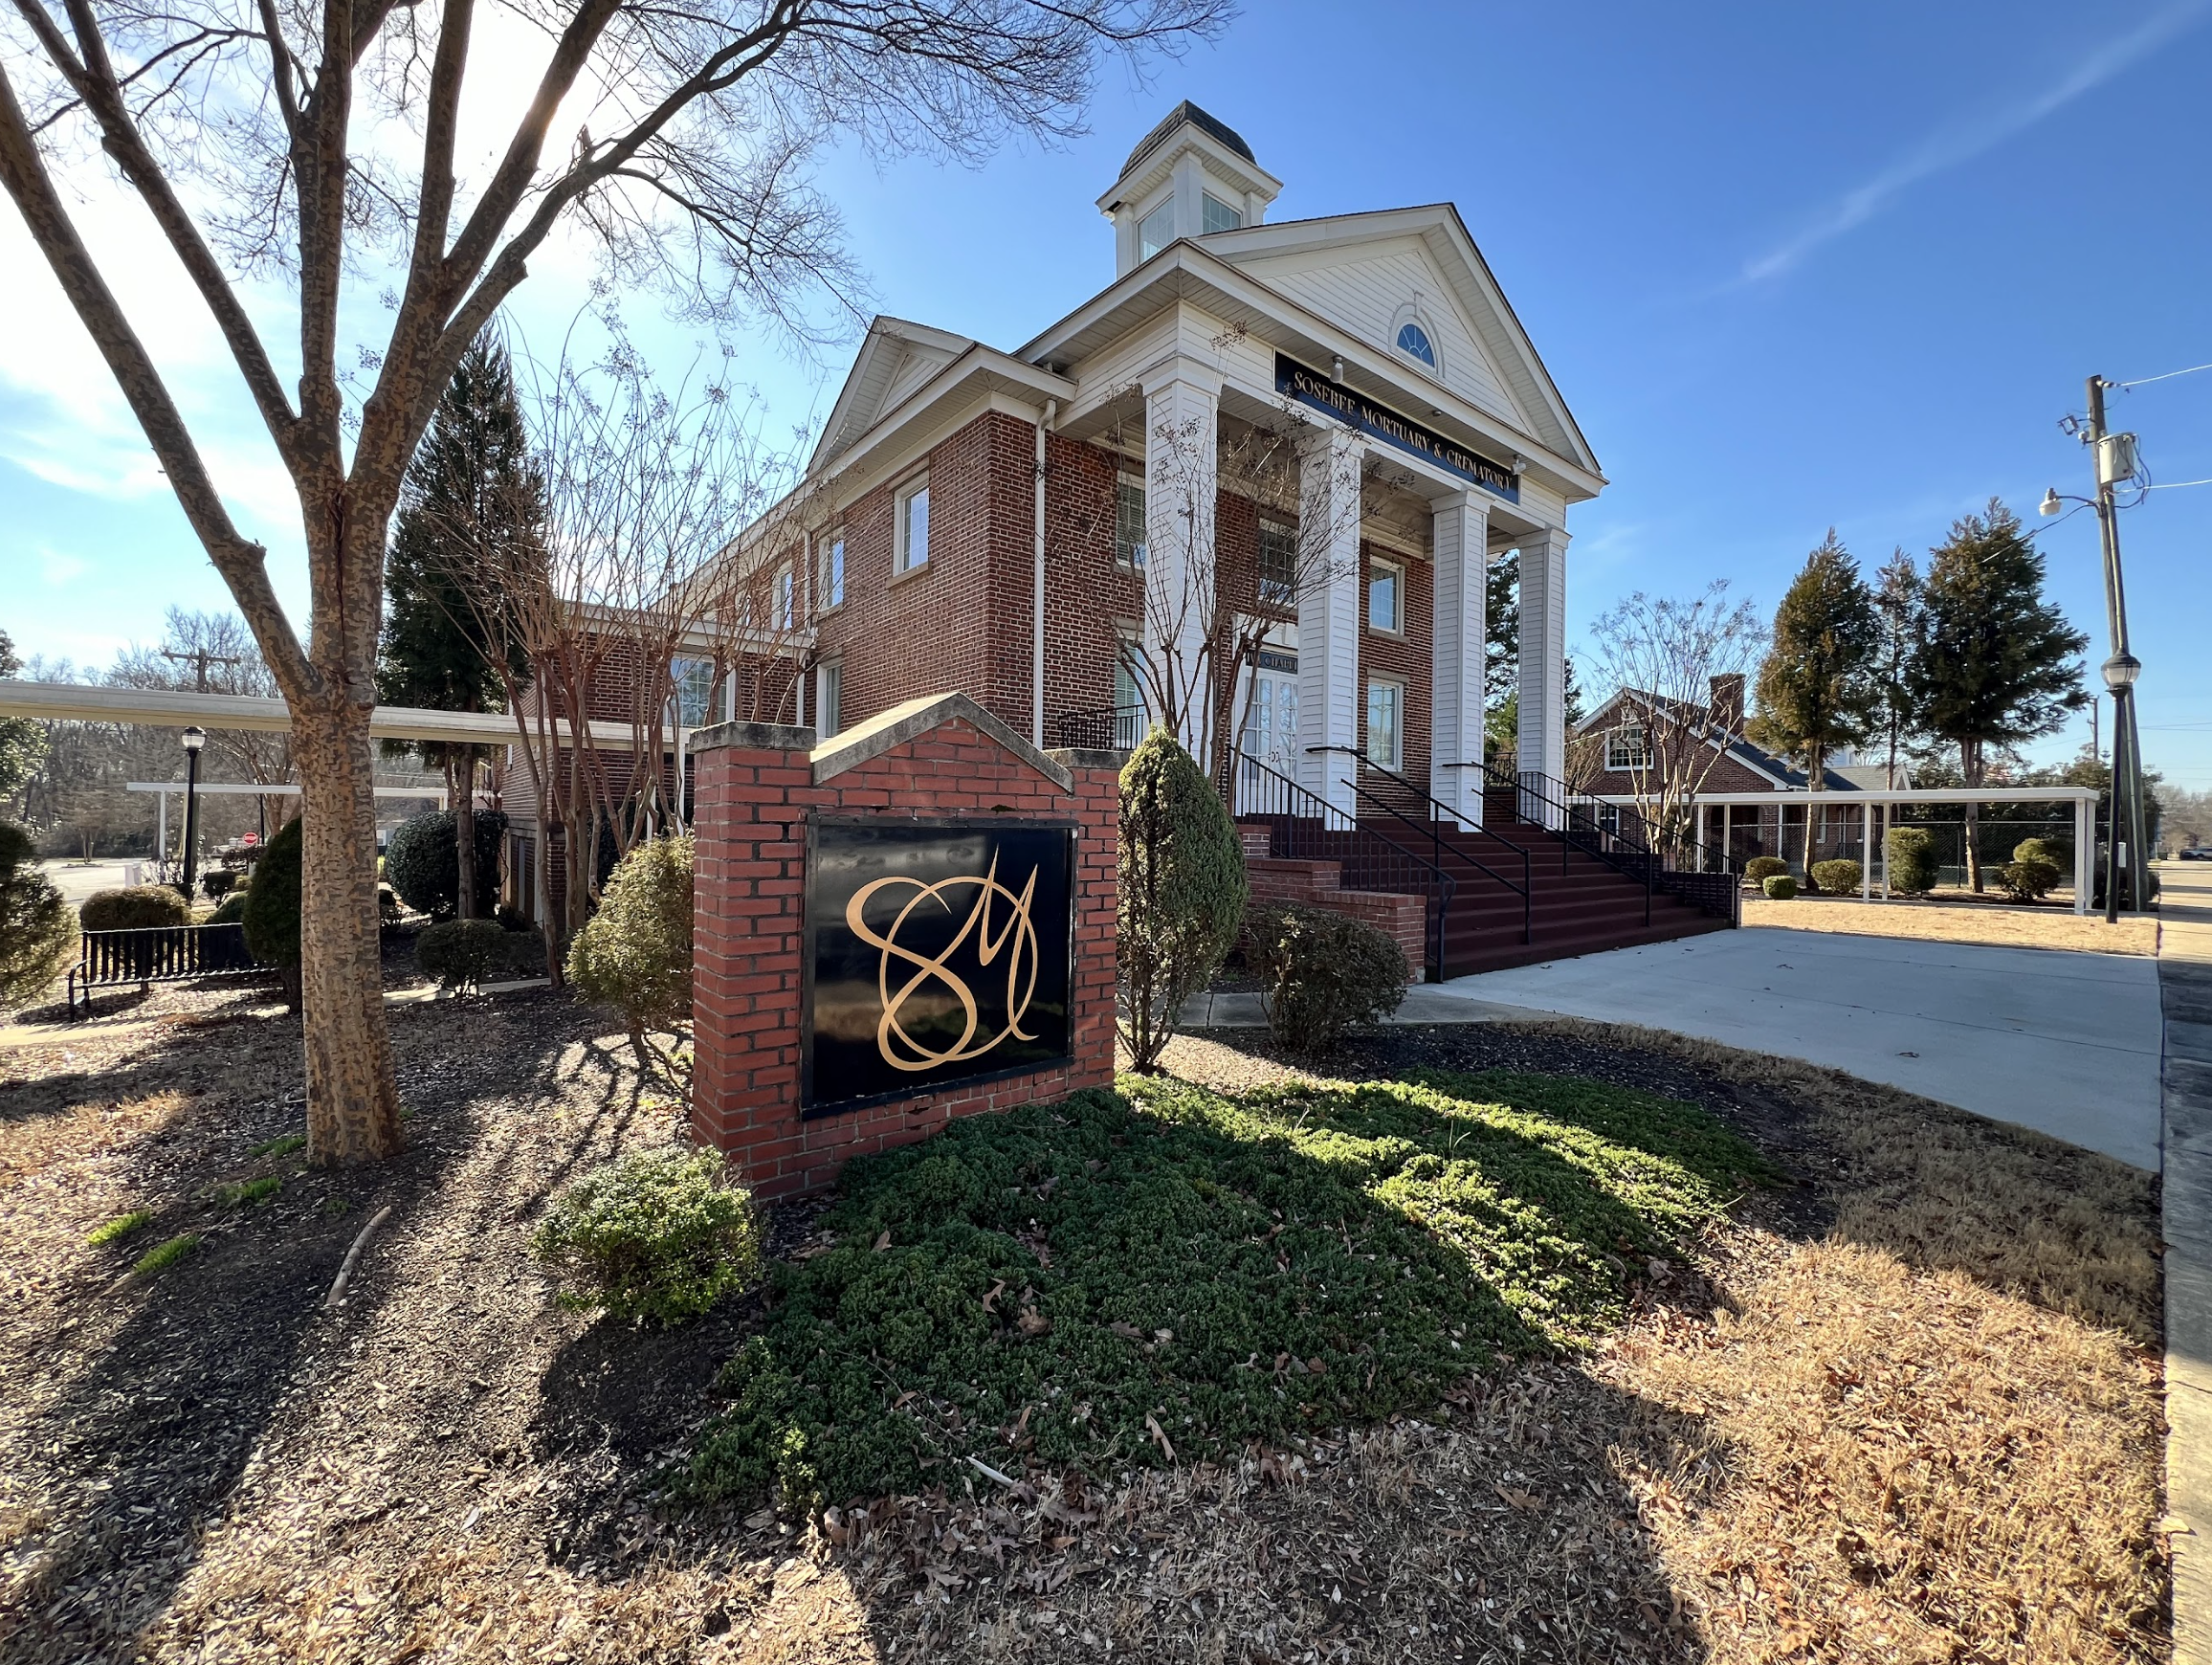 Sosebee Mortuary's Iva Chapel - Welcome to Sosebee Mortuary Iva Chapel, a place where compassion and respect converge in times of remembrance. Our Iva Chapel is nestled at the historic site of the former Iva First Baptist Church, located at 204 East Green St in Iva, SC.